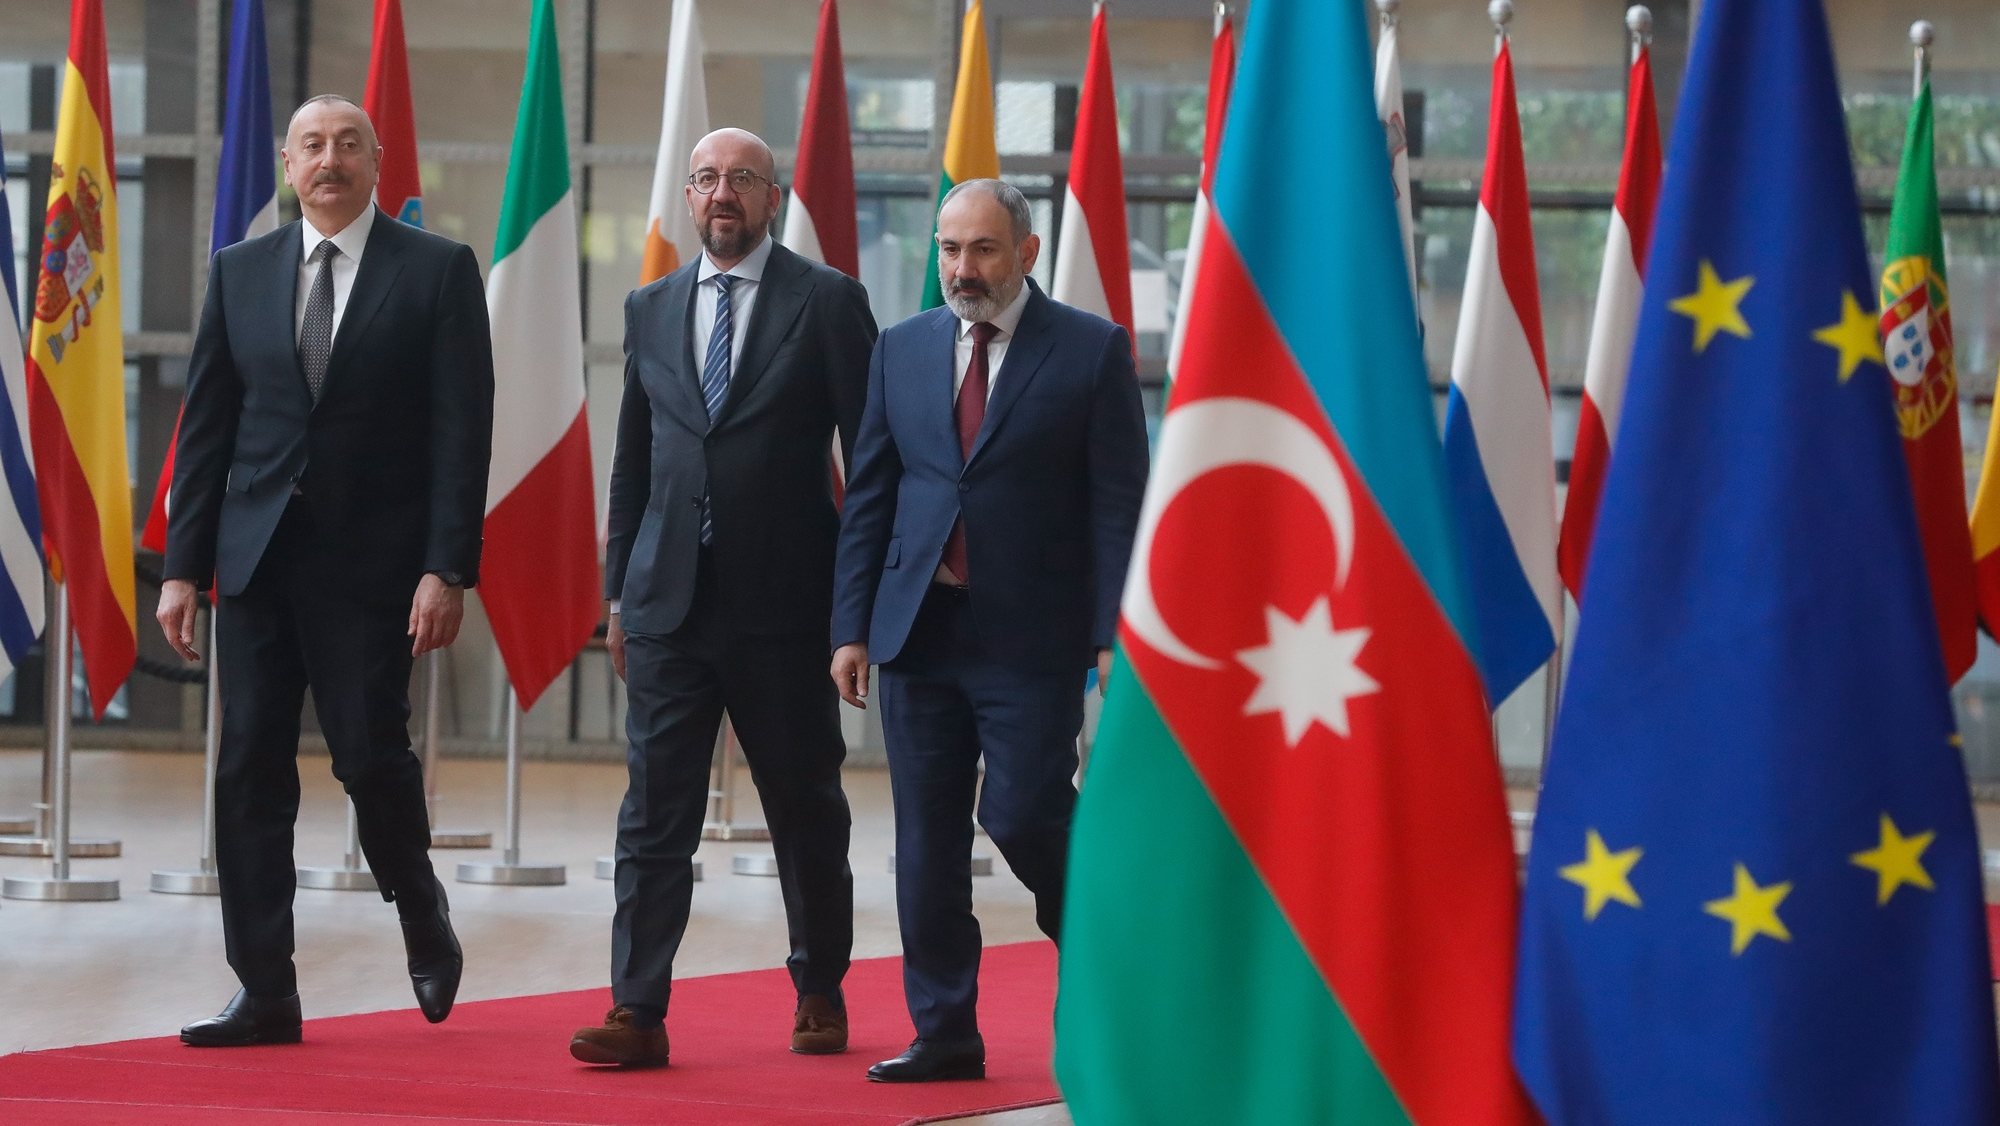 epa09966869 Azerbaijani President Ilham Aliyev (L) and Armenian Prime Minister Nikol Pashinyan are welcomed by the President of the European Council Charles Michel (C) in Brussels, Belgium, 22 May 2022. Charles Michel meets Azerbaijani President Ilham Aliyev and Armenian Prime Minister Nikol Pashinyan.  EPA/STEPHANIE LECOCQ